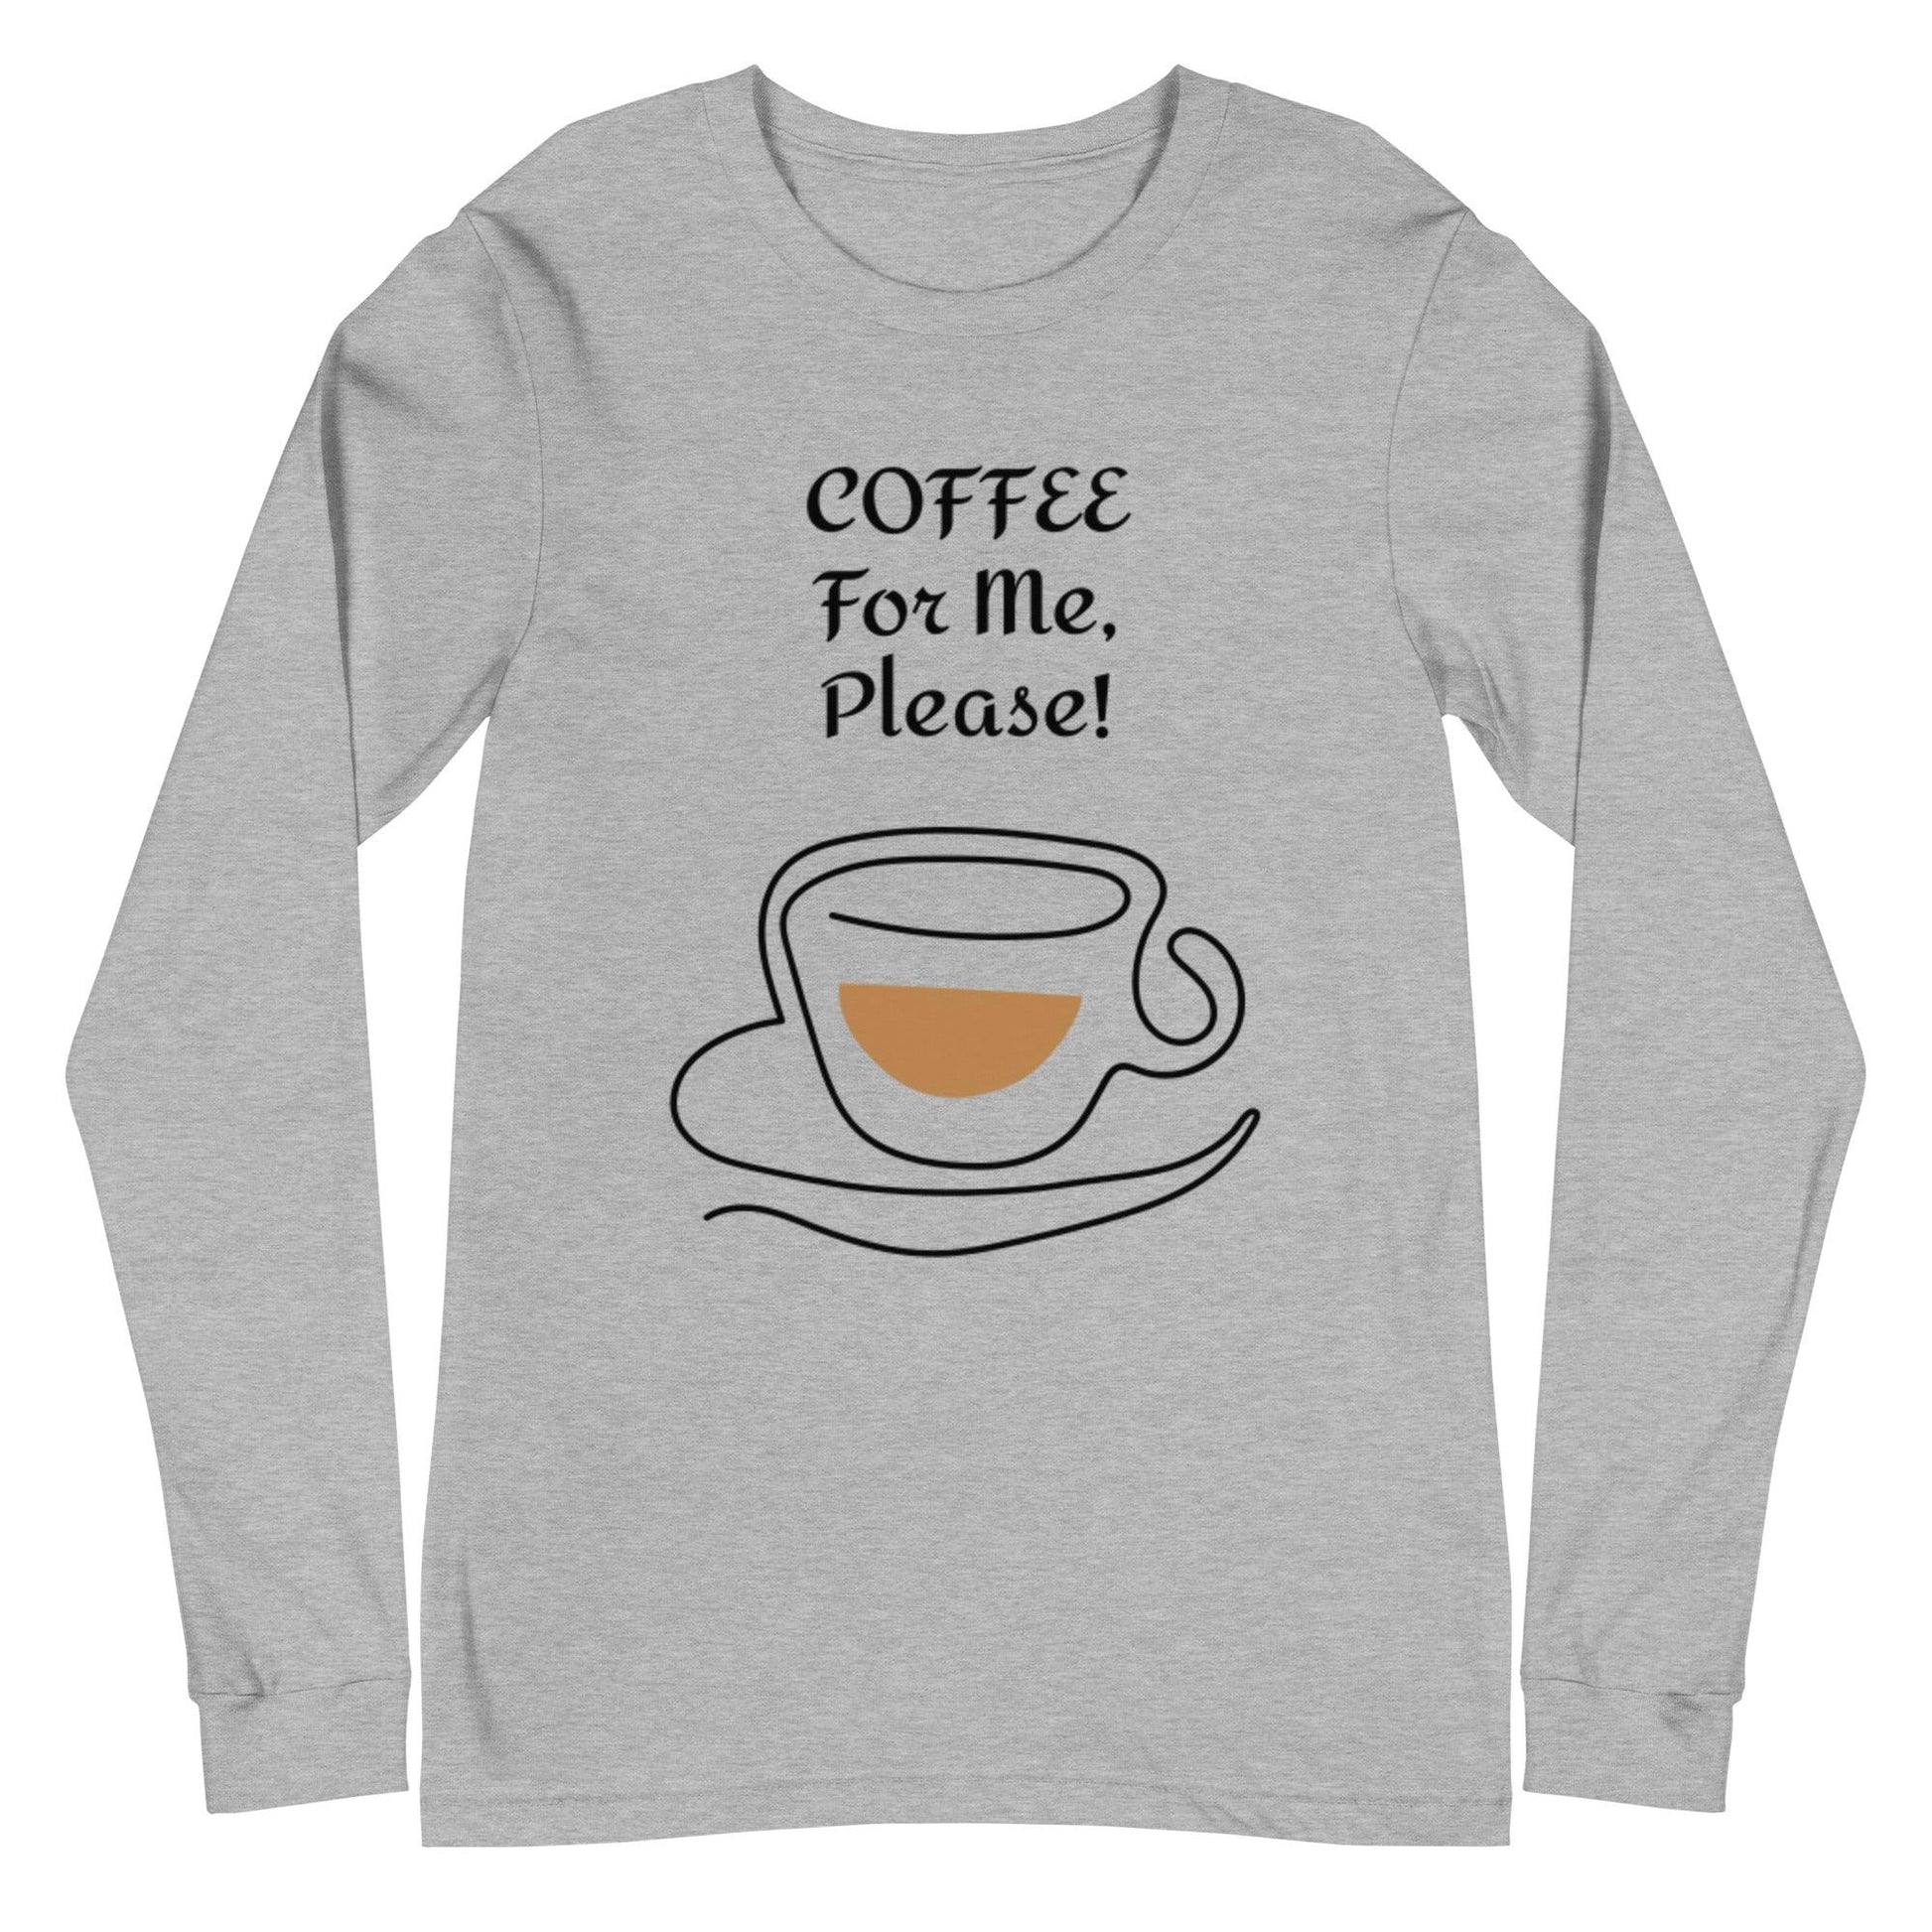 COFFEE For ME, Please! w/ a Cup and Saucer Unisex Long Sleeve Tee - Lizard Vigilante